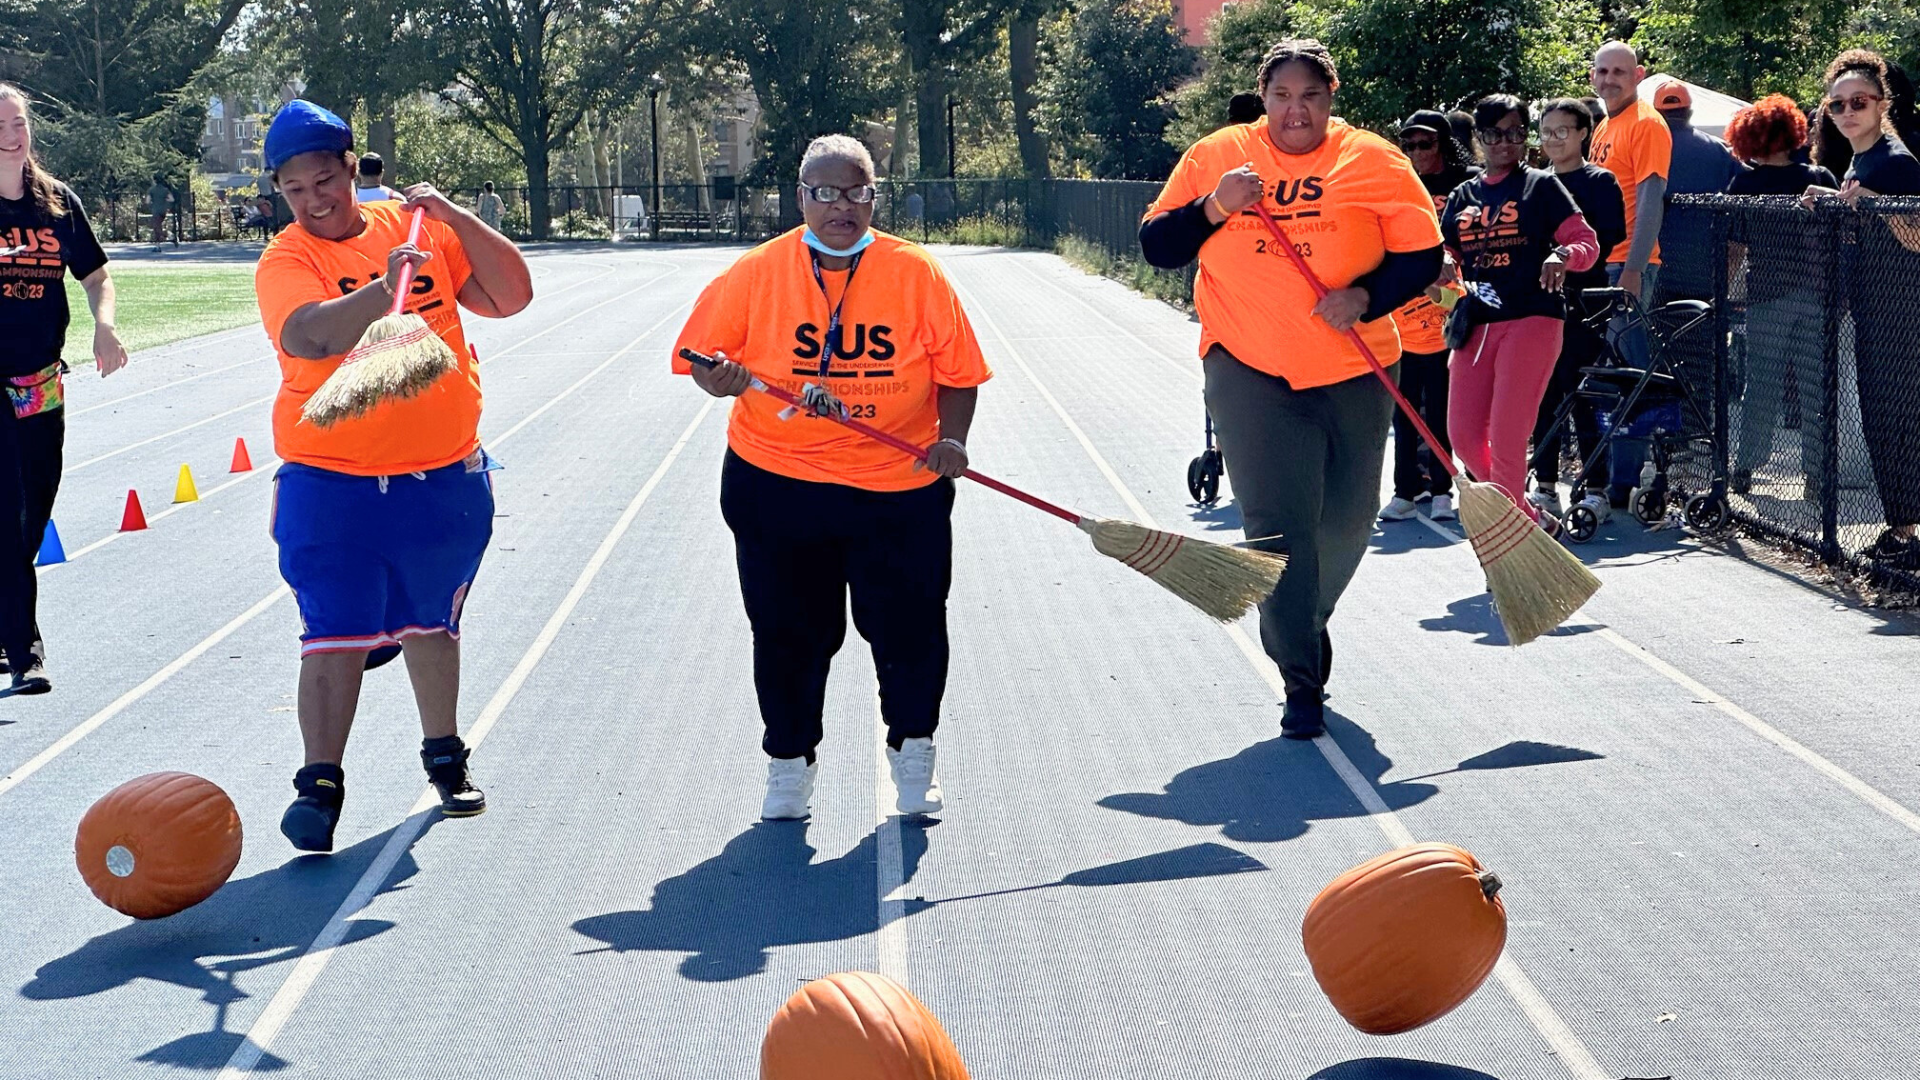 S:US Hosts Annual Developmental Disabilities Championships & Family Fun Day